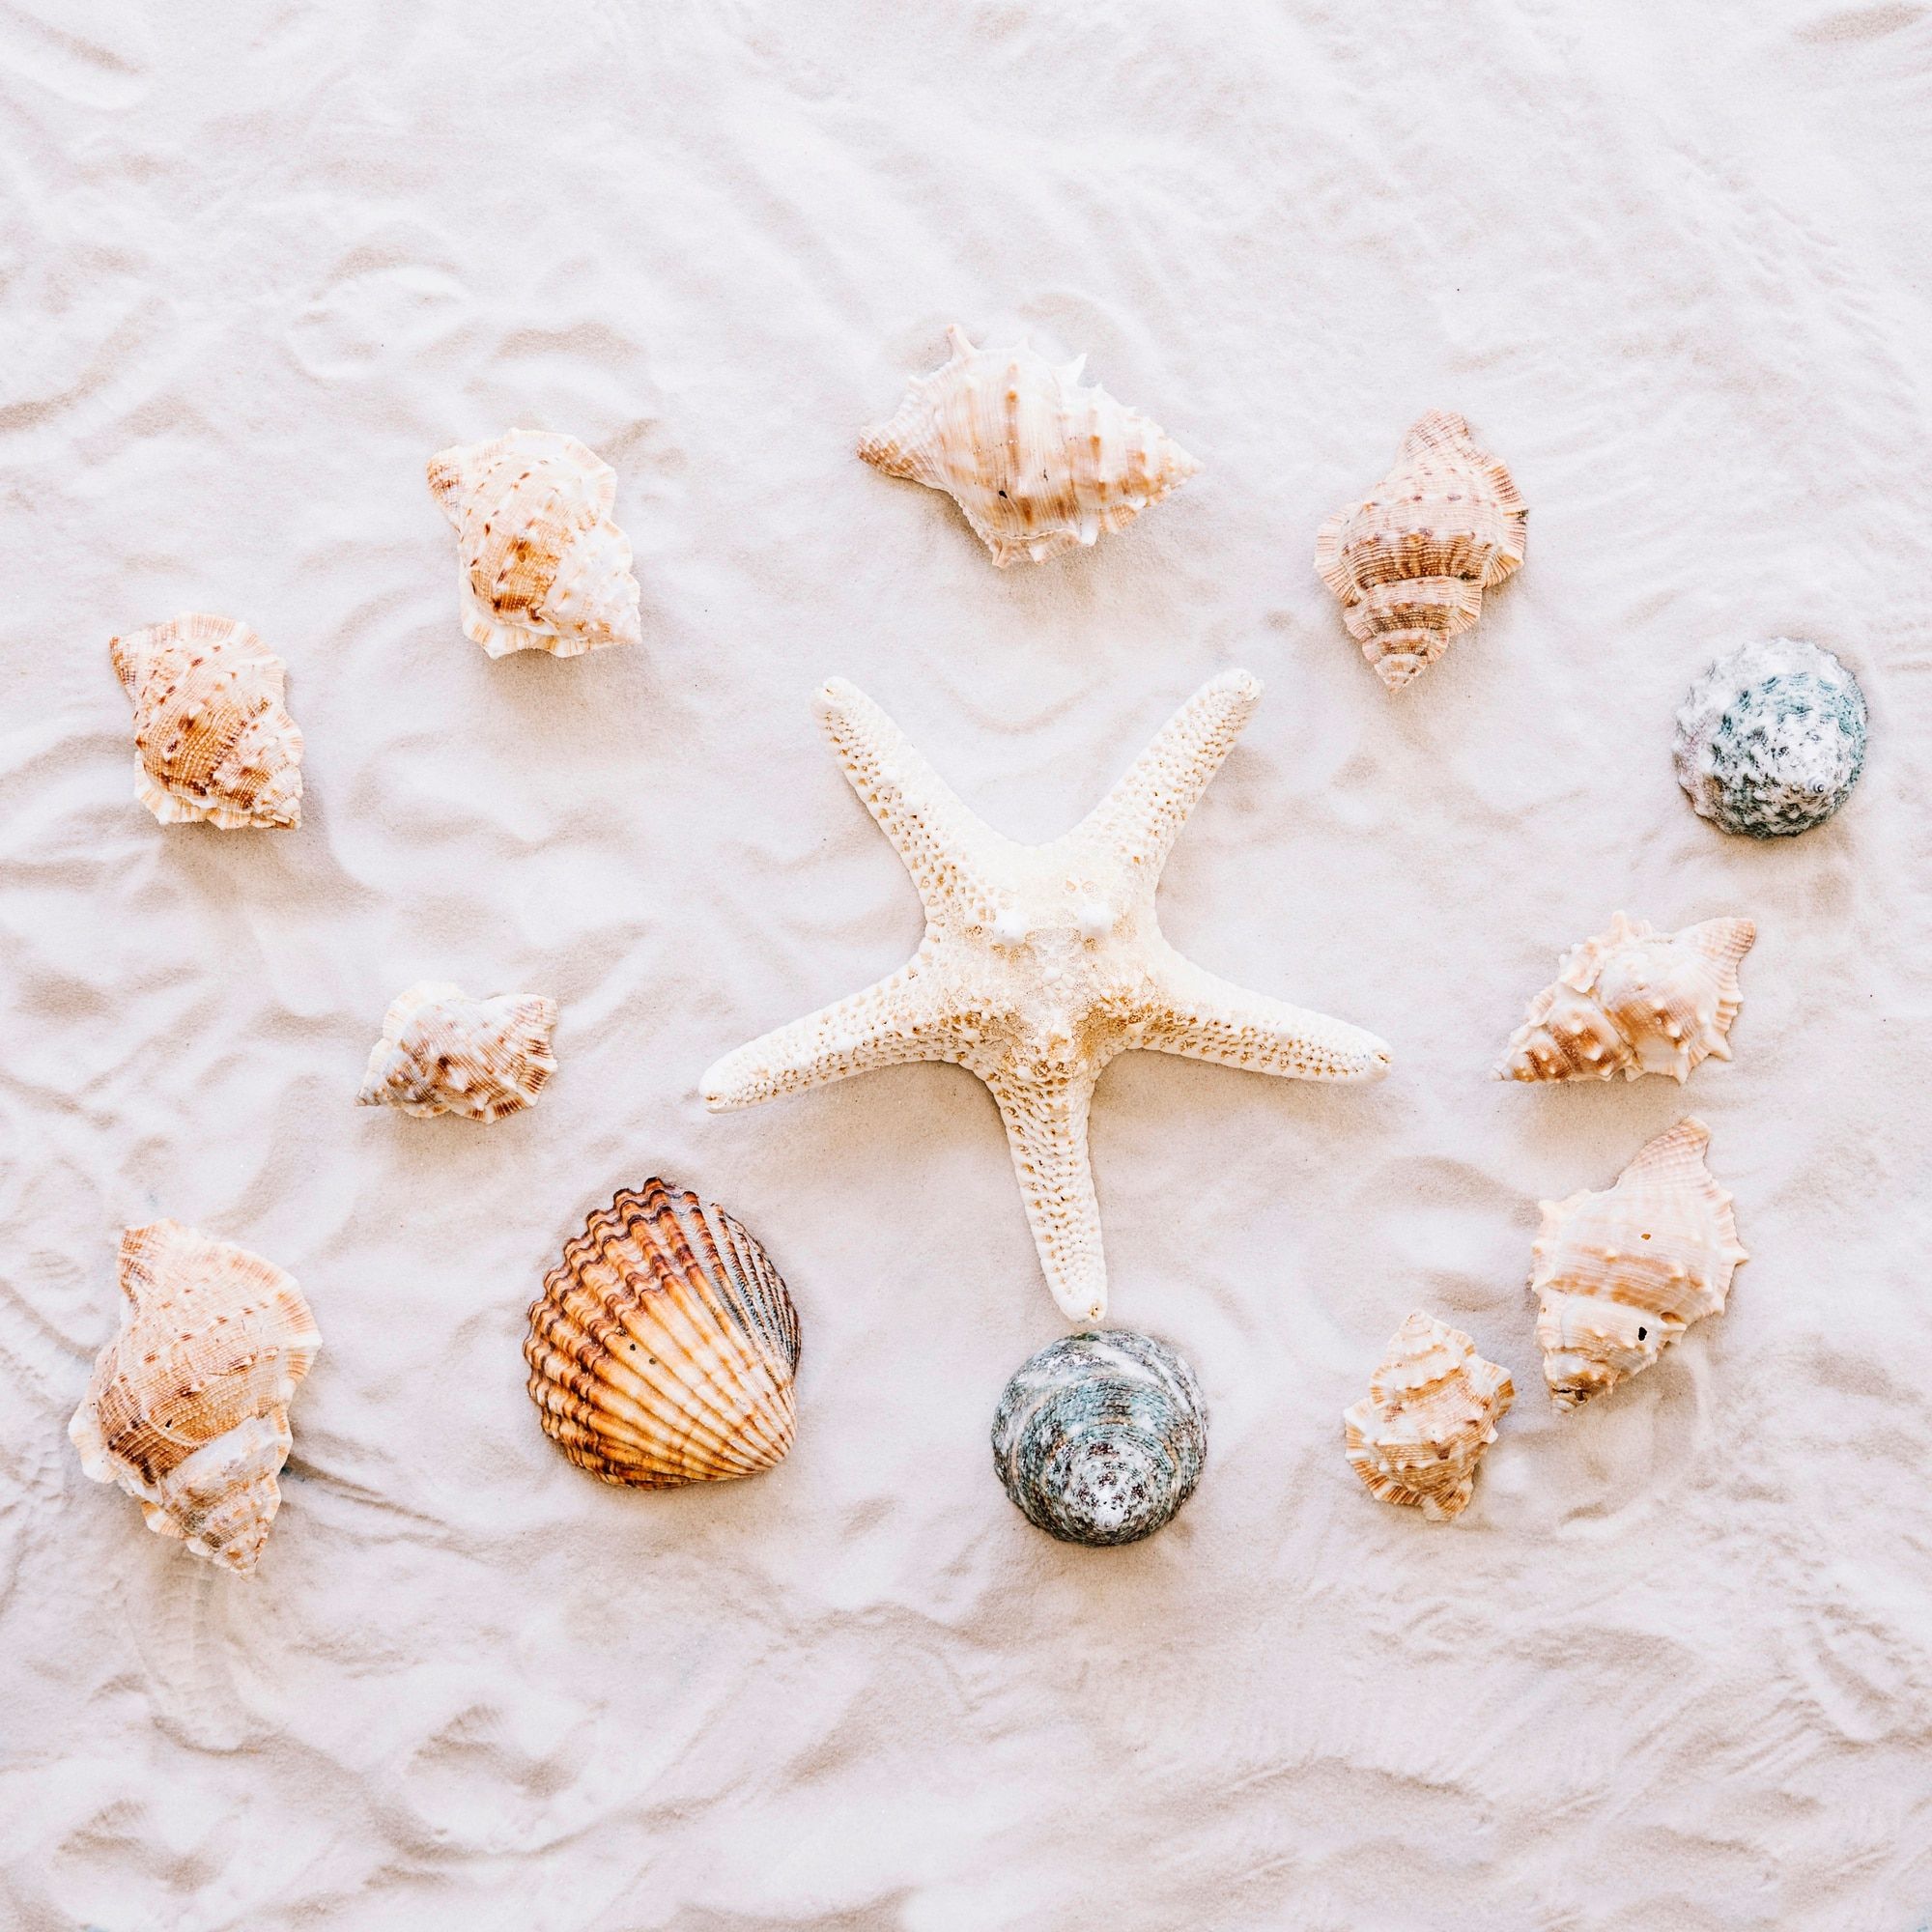 Free Photo. Summer concept with starfish and shells